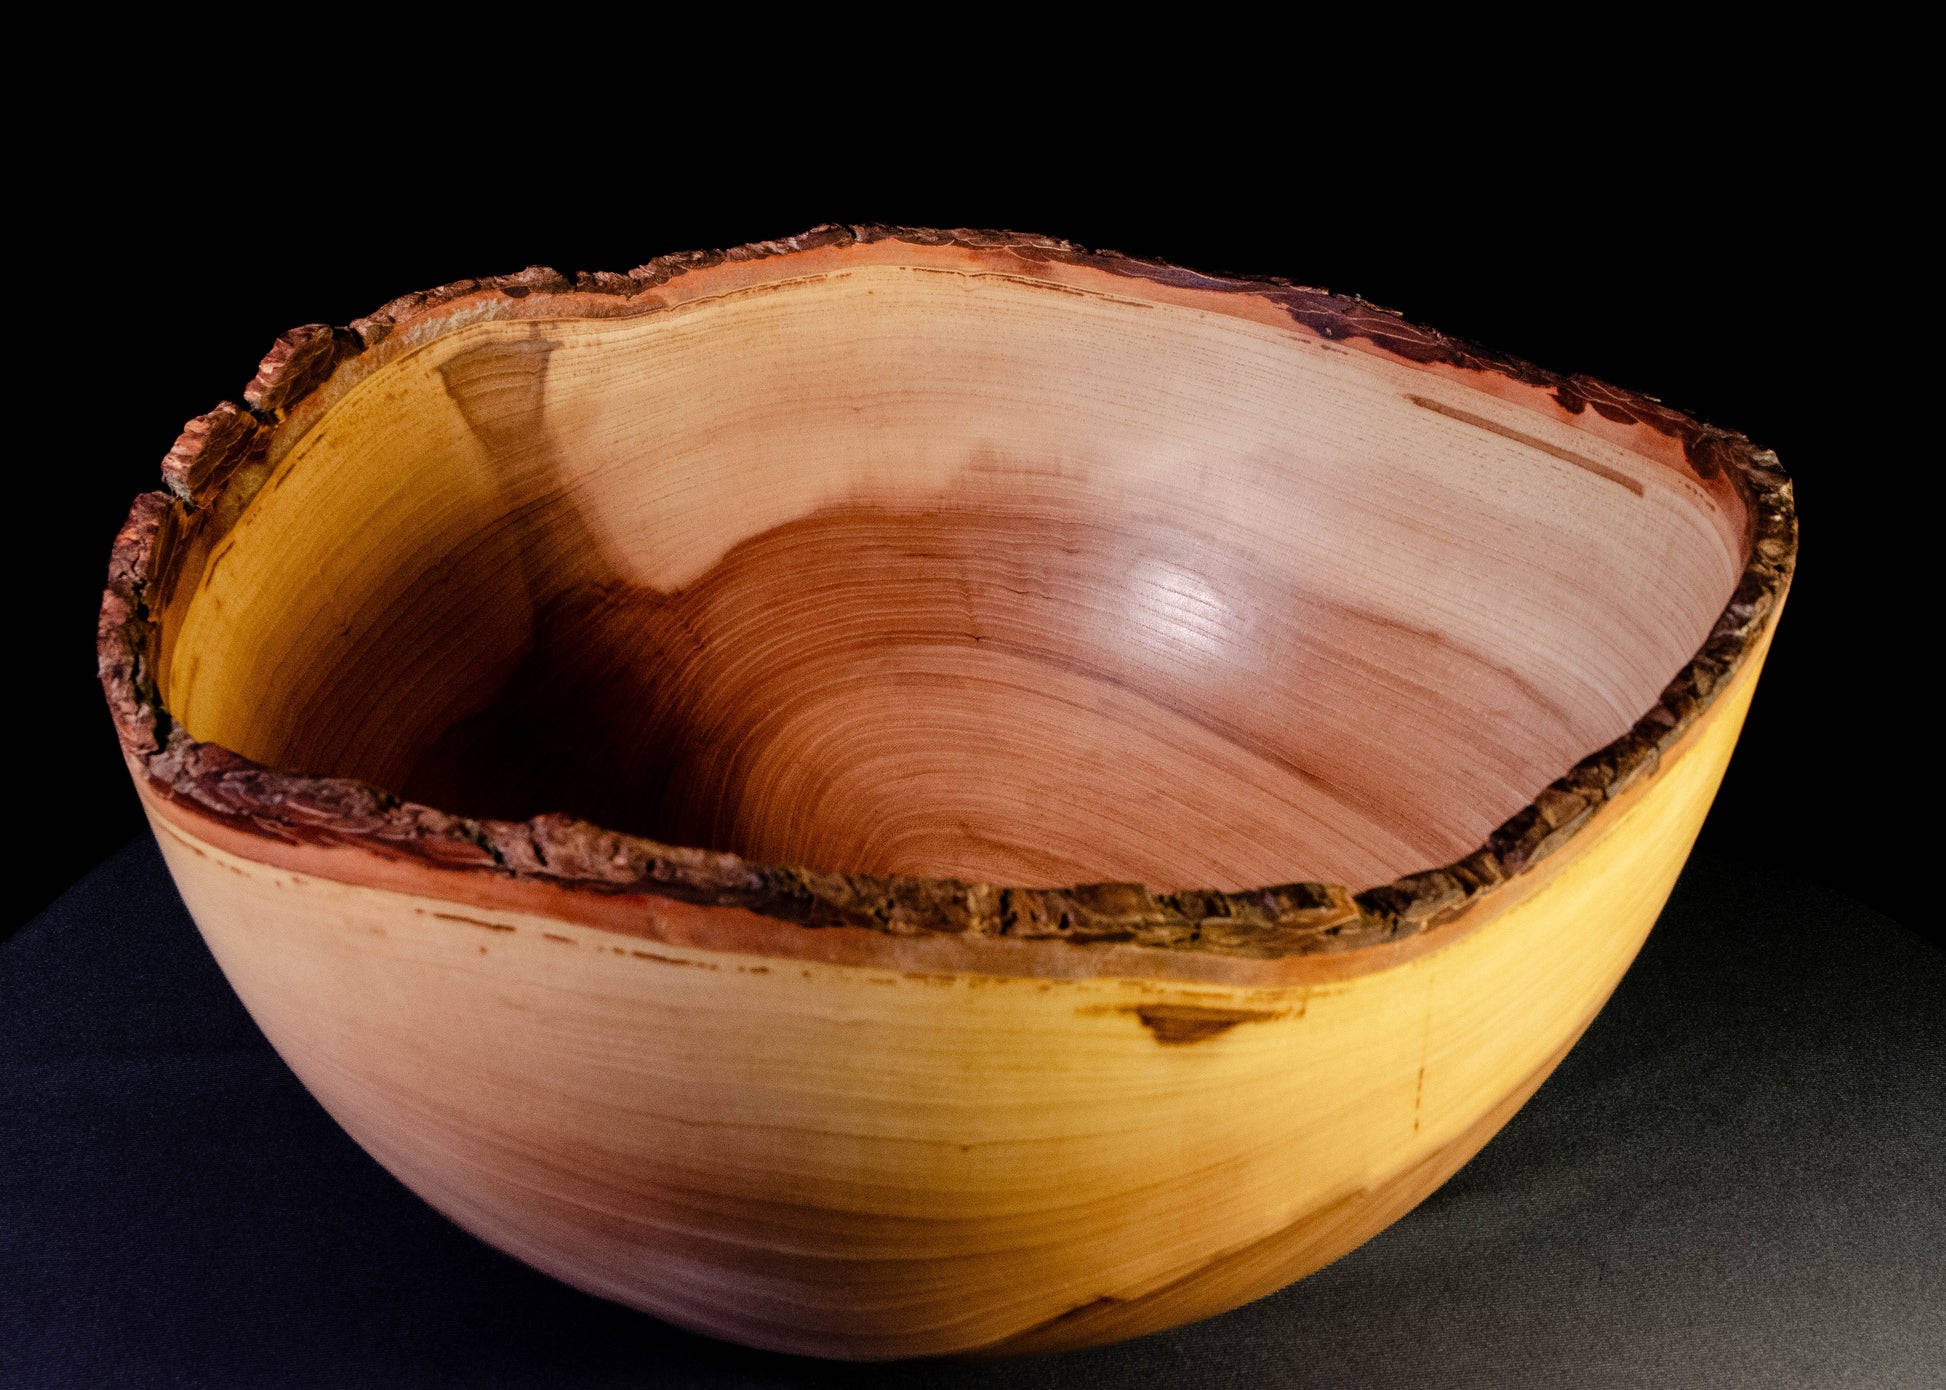 Large bowl with warm grain and bark-on natural edge. This is a family style serving bowl that would make for a stunning centerpiece or other decorative gift.